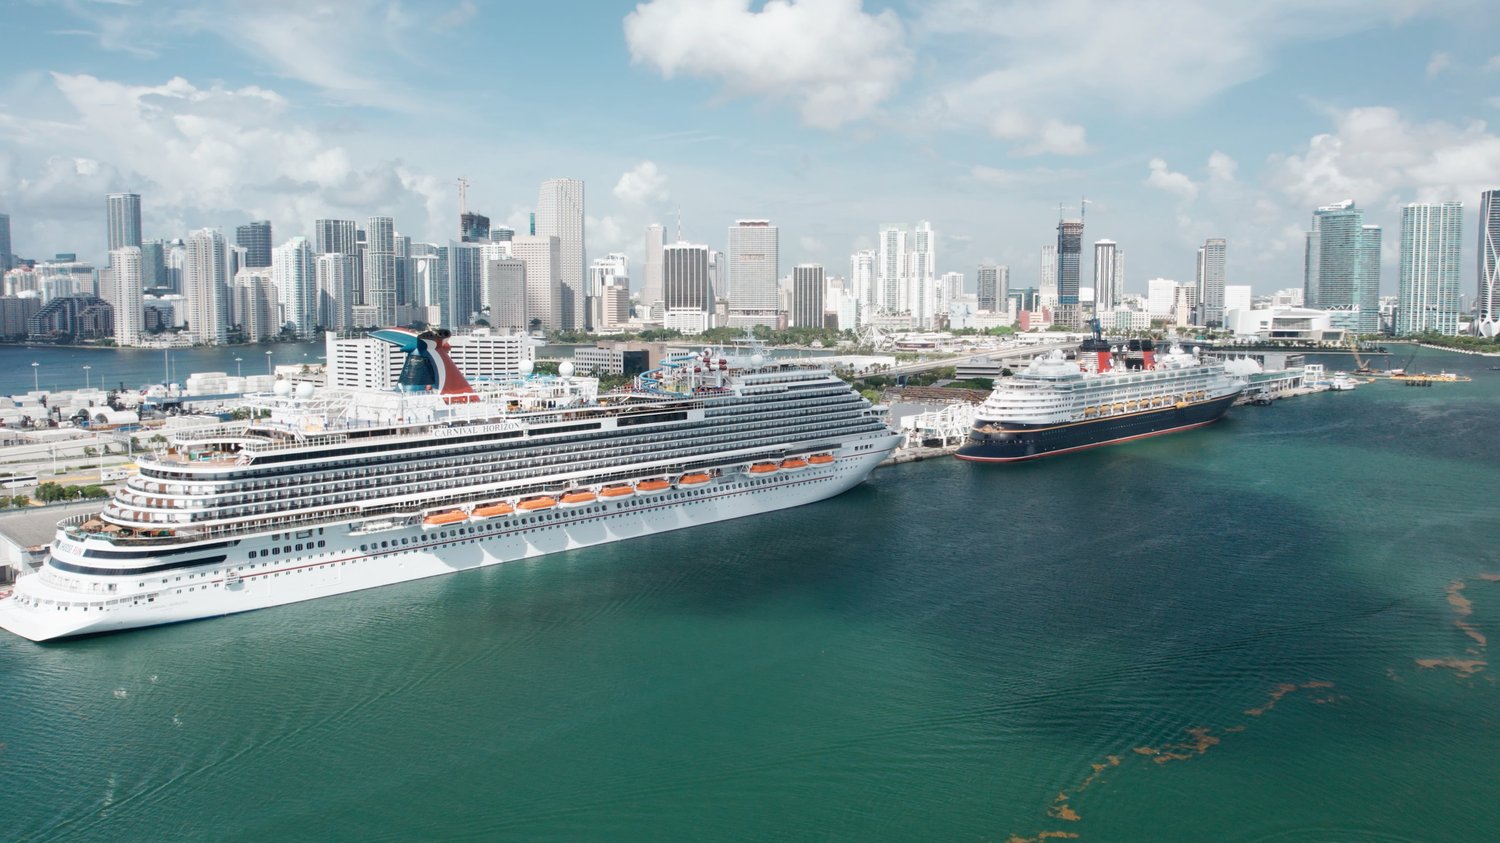 Cruise ships at port of Miami with downtown skyline in background.